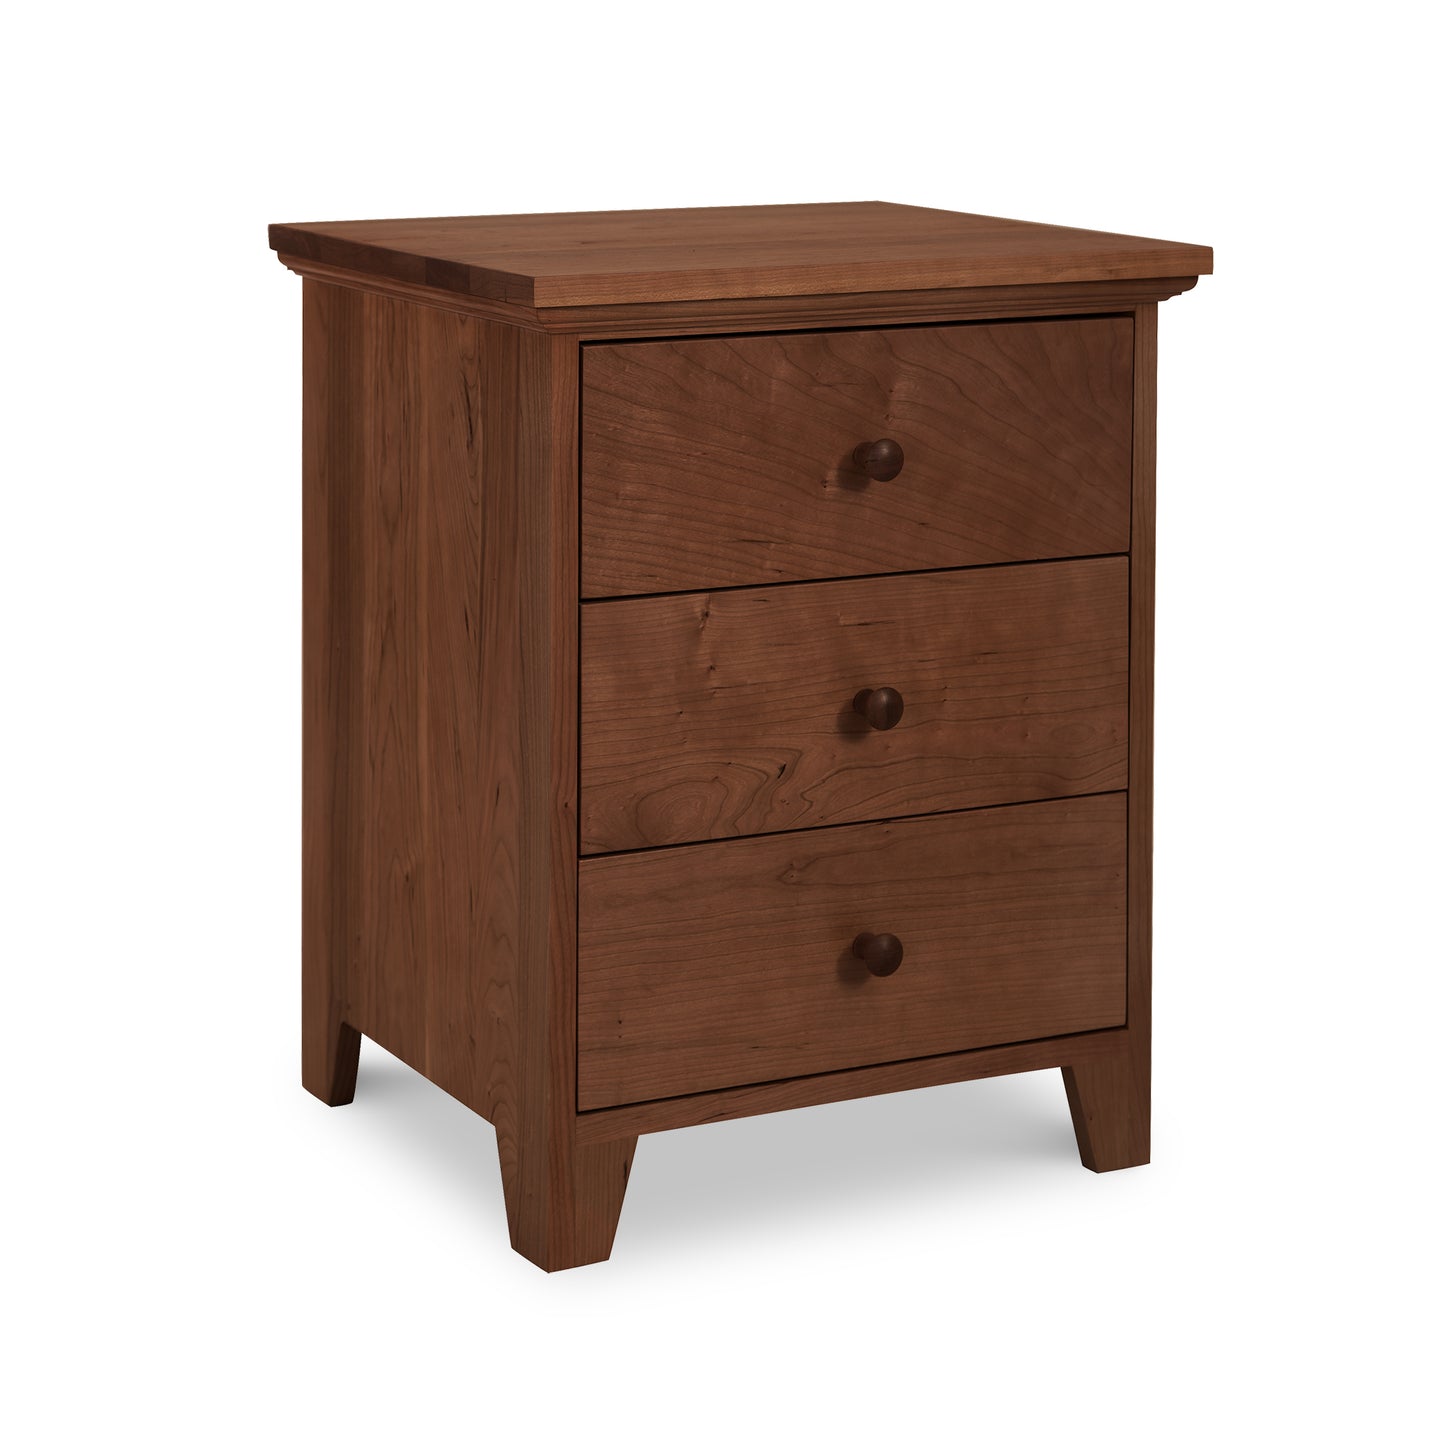 An American Country 3-Drawer Nightstand, crafted from solid wood and featuring three drawers, set against a white background. Brand: Lyndon Furniture.